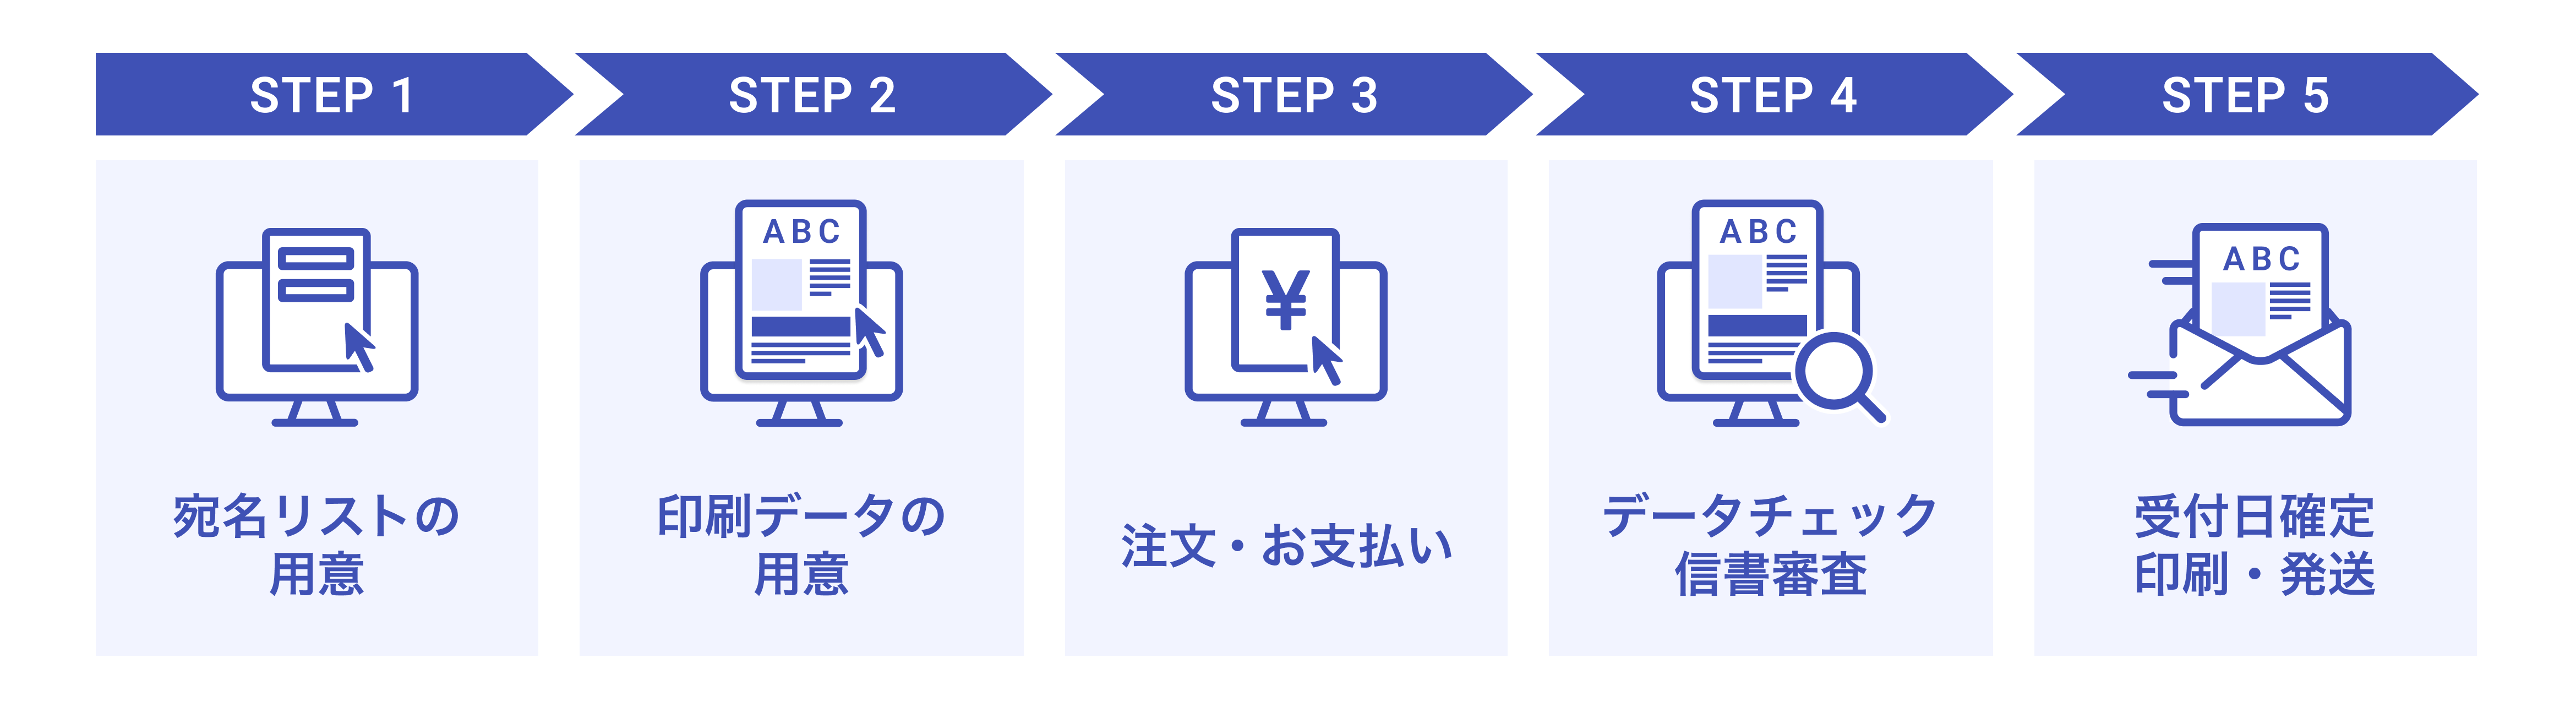 STEP5.png